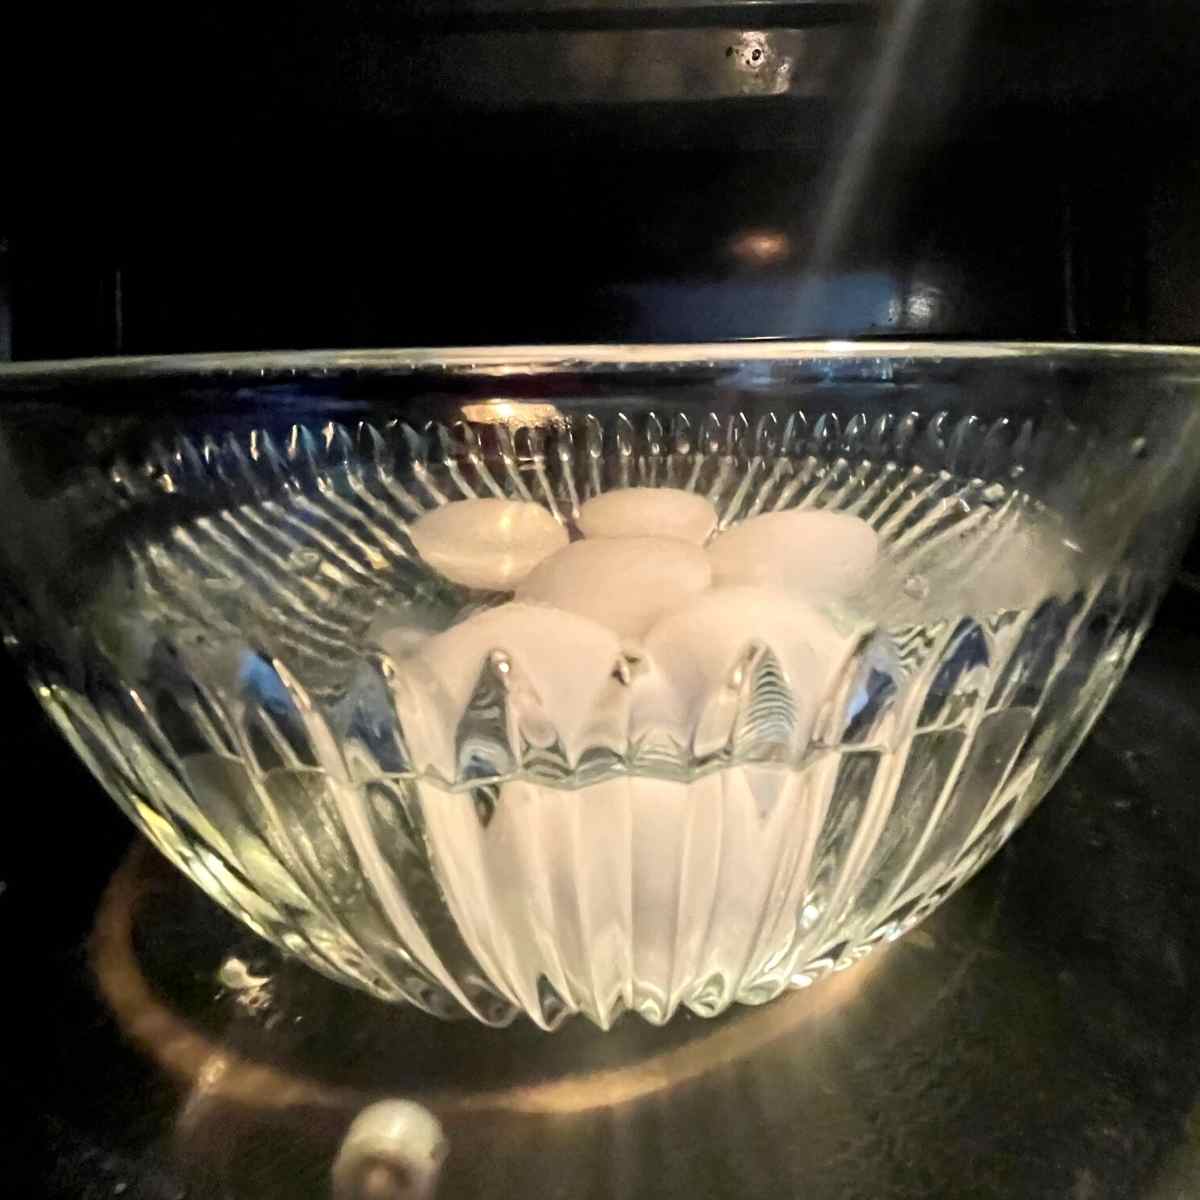 how to make soft boiled eggs in microwave